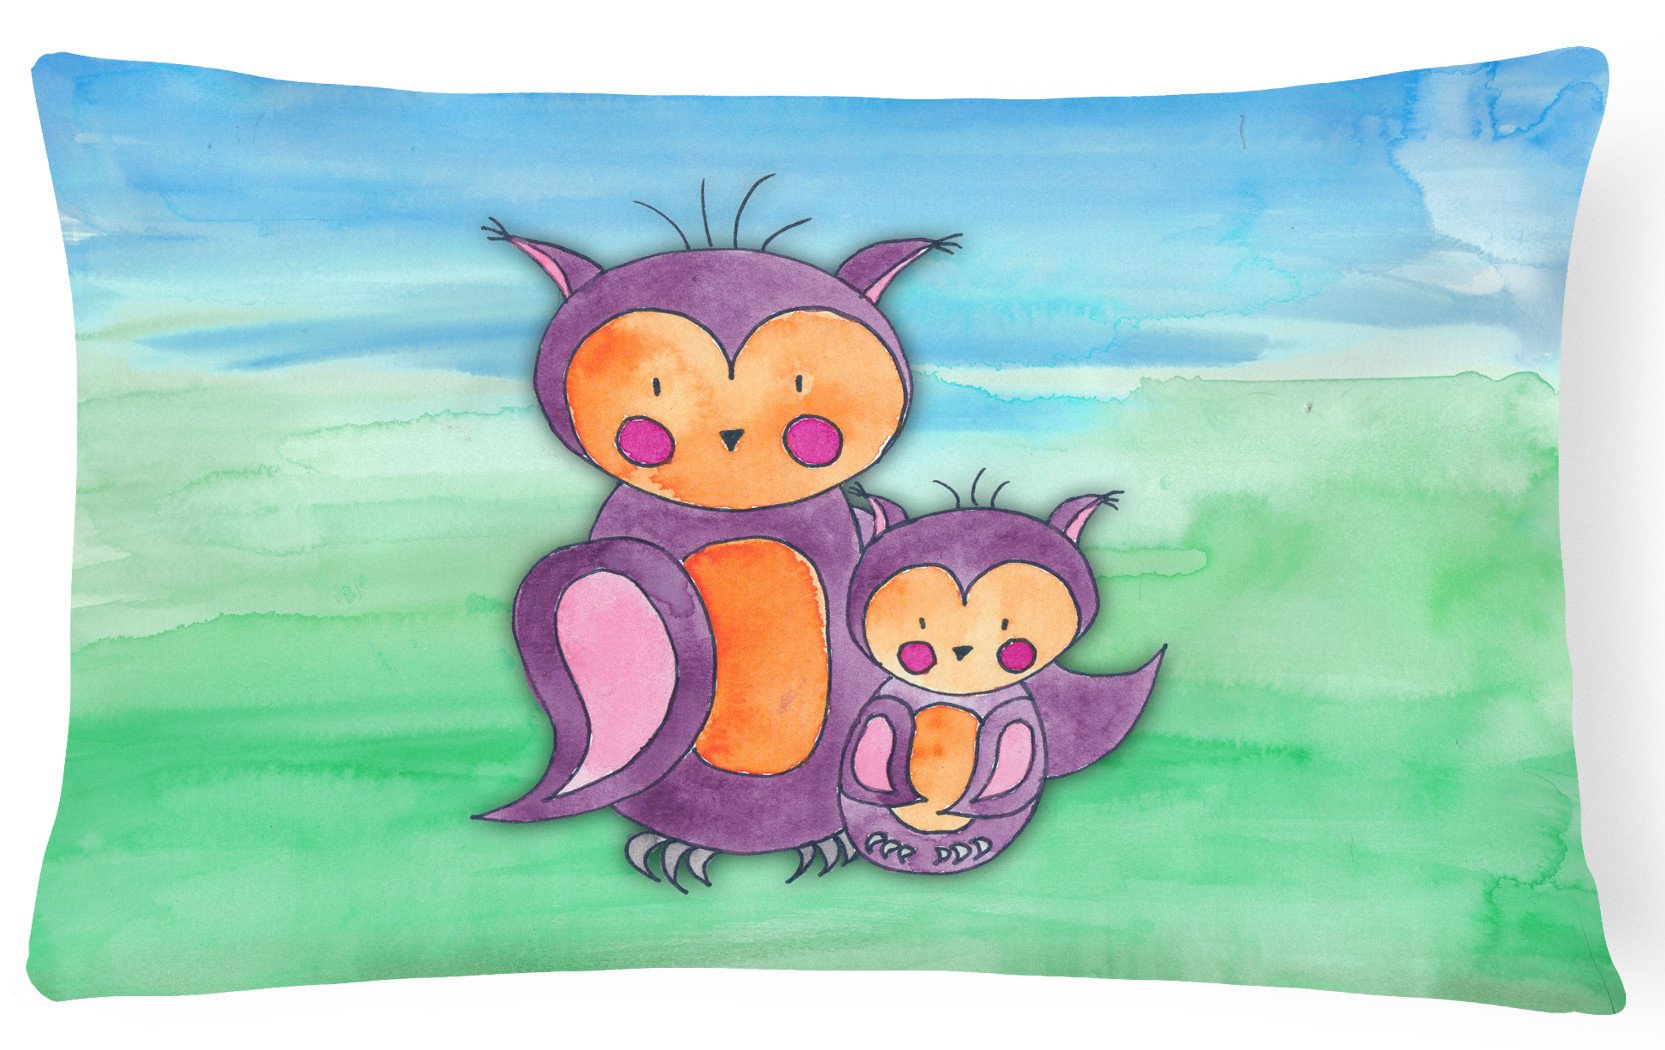 Momma and Baby Owl Watercolor Canvas Fabric Decorative Pillow BB7430PW1216 by Caroline's Treasures